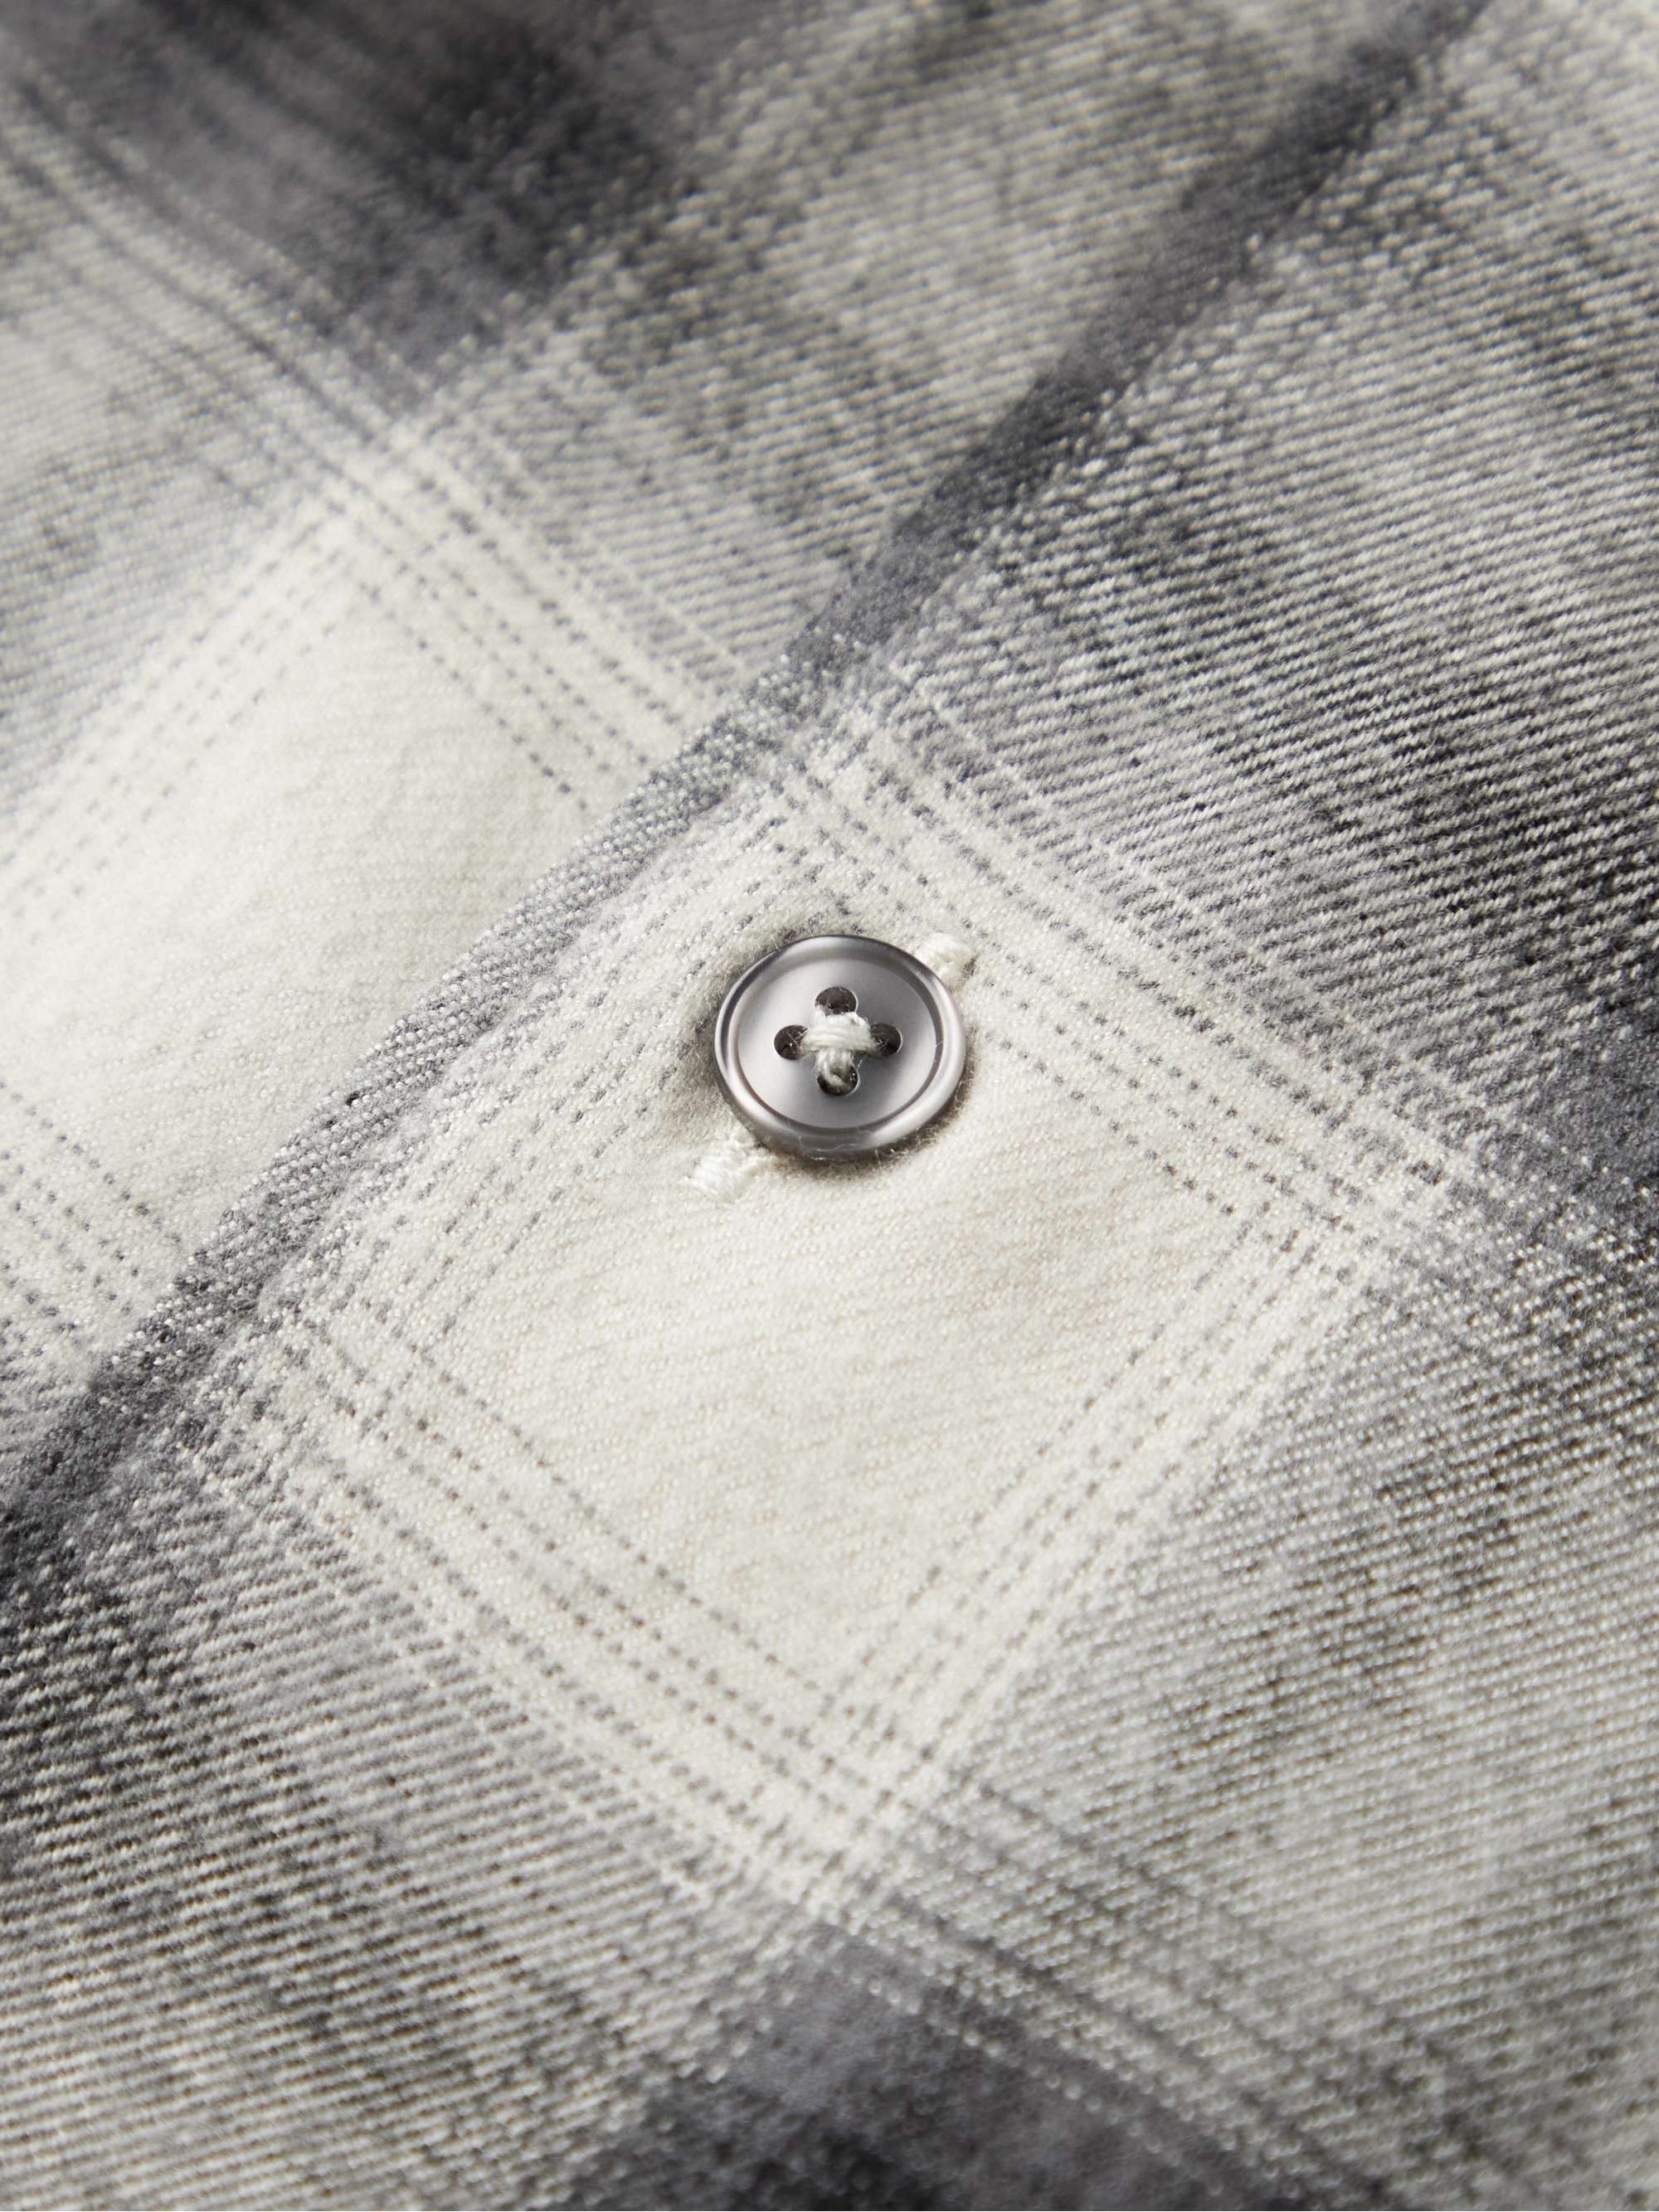 ALTEA Harris Checked Cotton and Lyocell-Blend Flannel Shirt